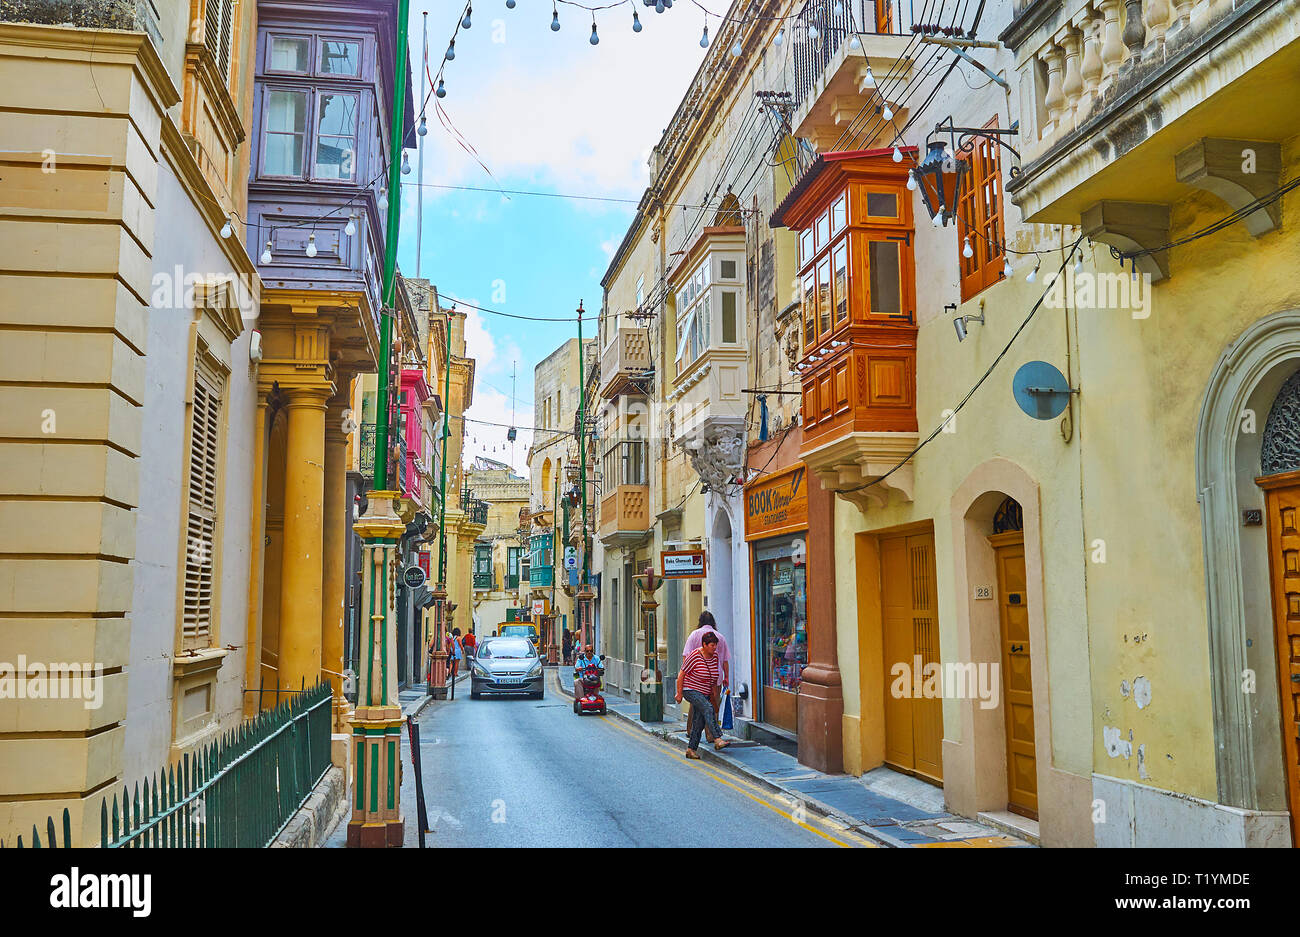 RABAT, MALTA - JUNE 16, 2018: The urban scene in old town with driving car, walking pedestrians, small stores, city festival decorations and lamps, on Stock Photo